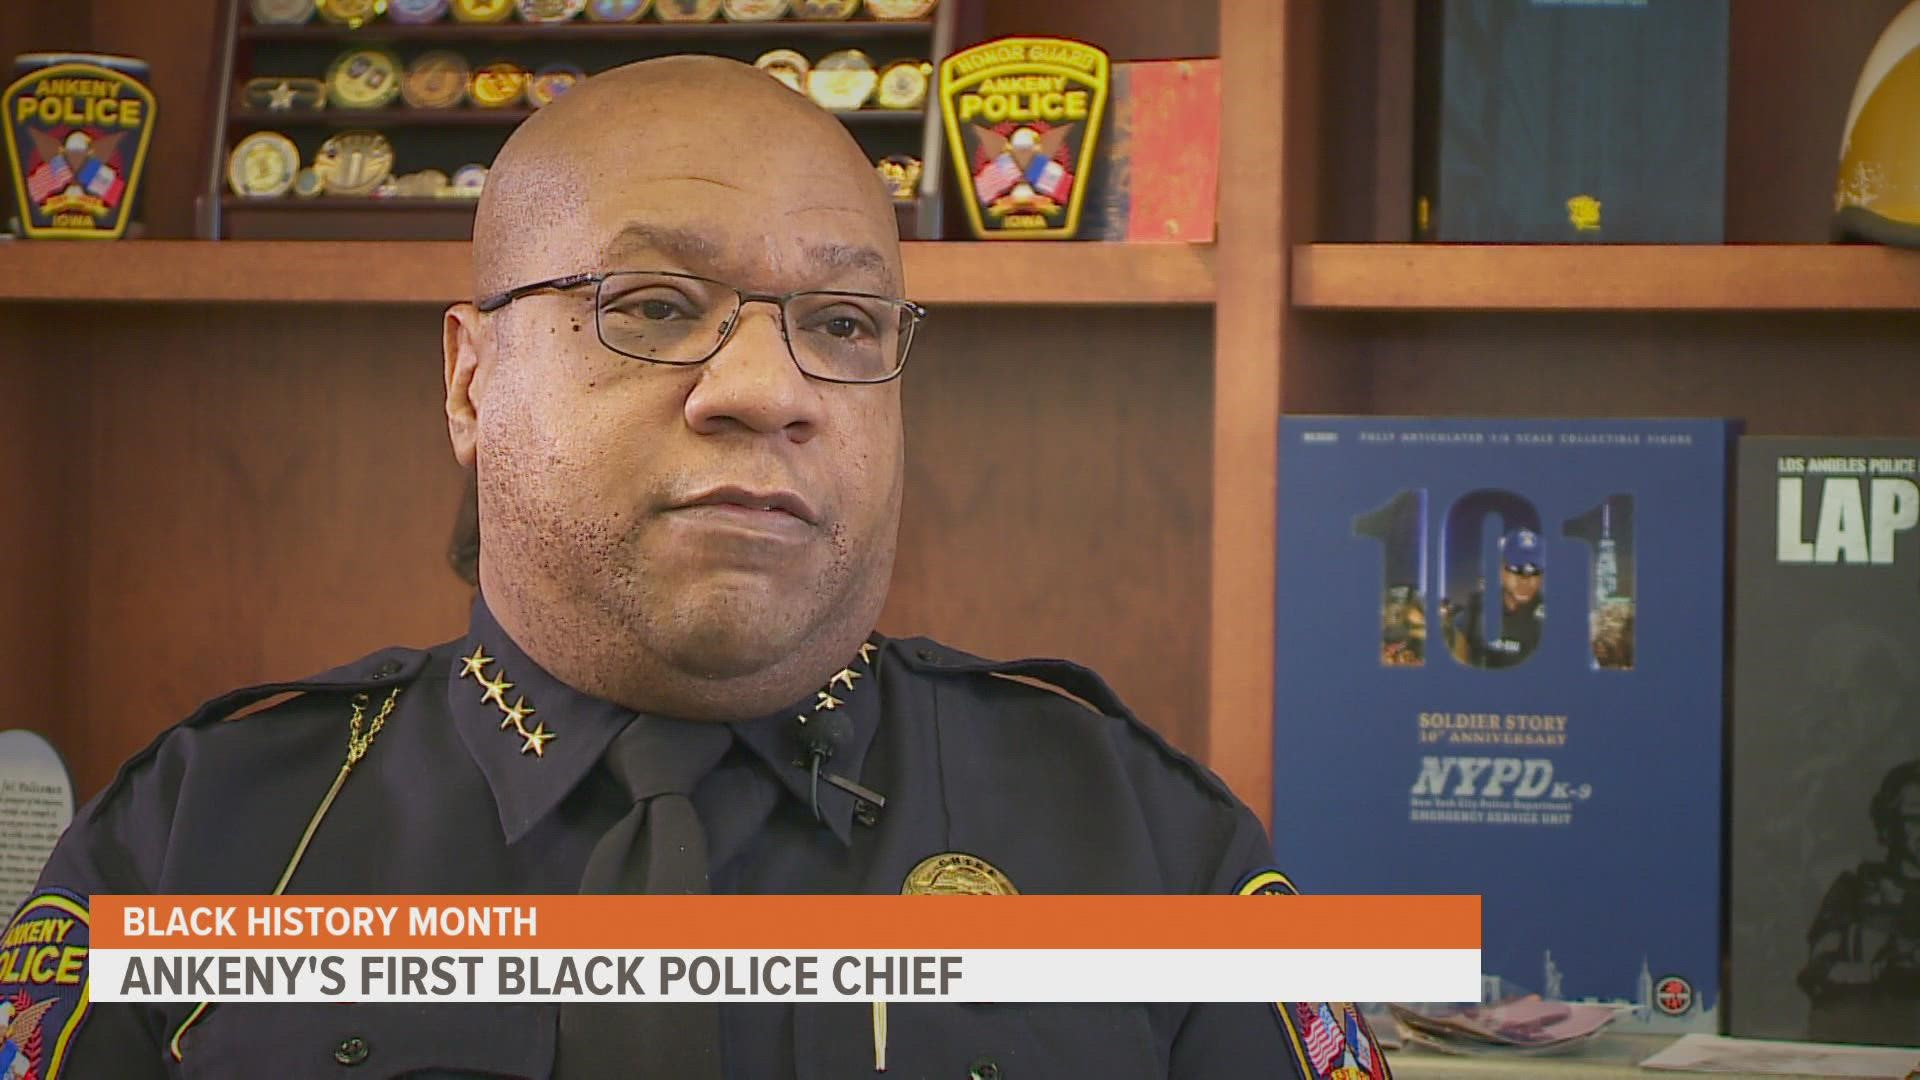 “I hope they see me as an example. I hope they see that we can get to this leadership level,” said Chief Darius Potts.